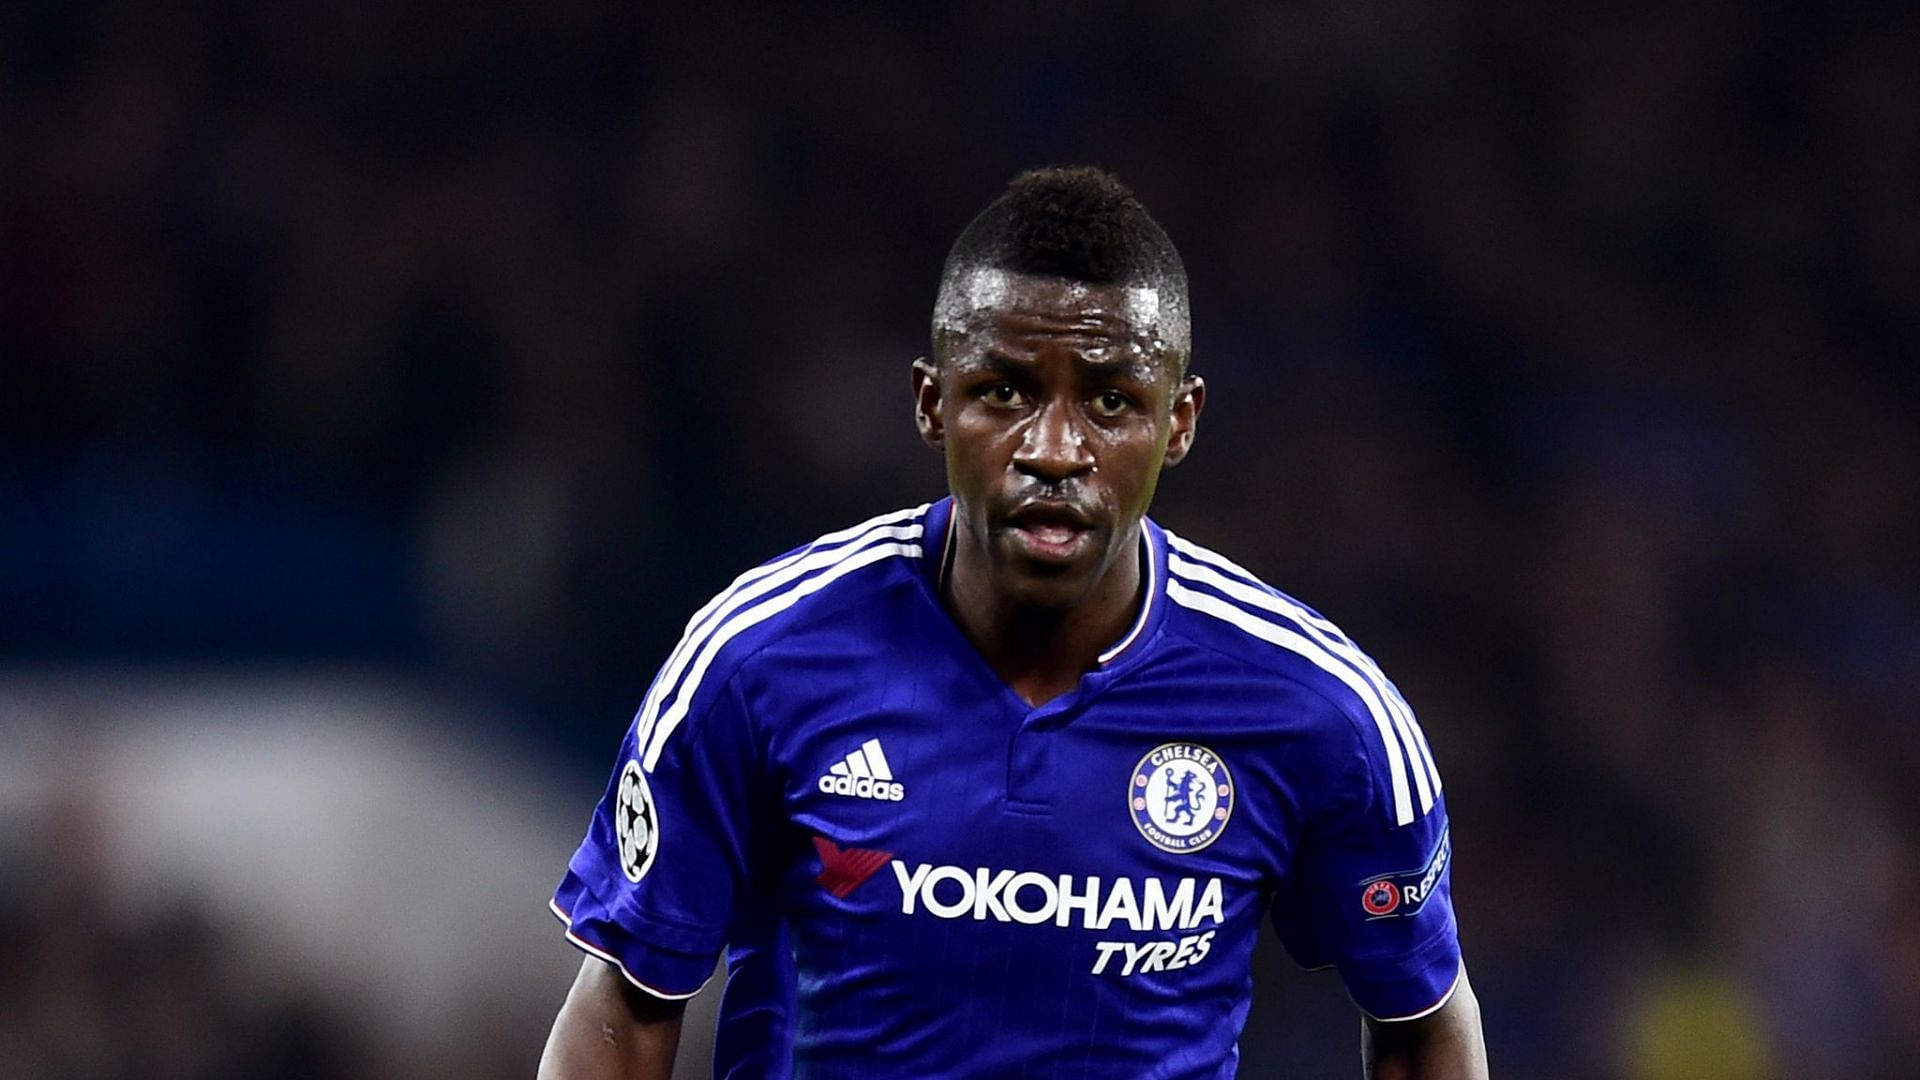 Ramires in action for Chelsea during a UEFA Champions League game